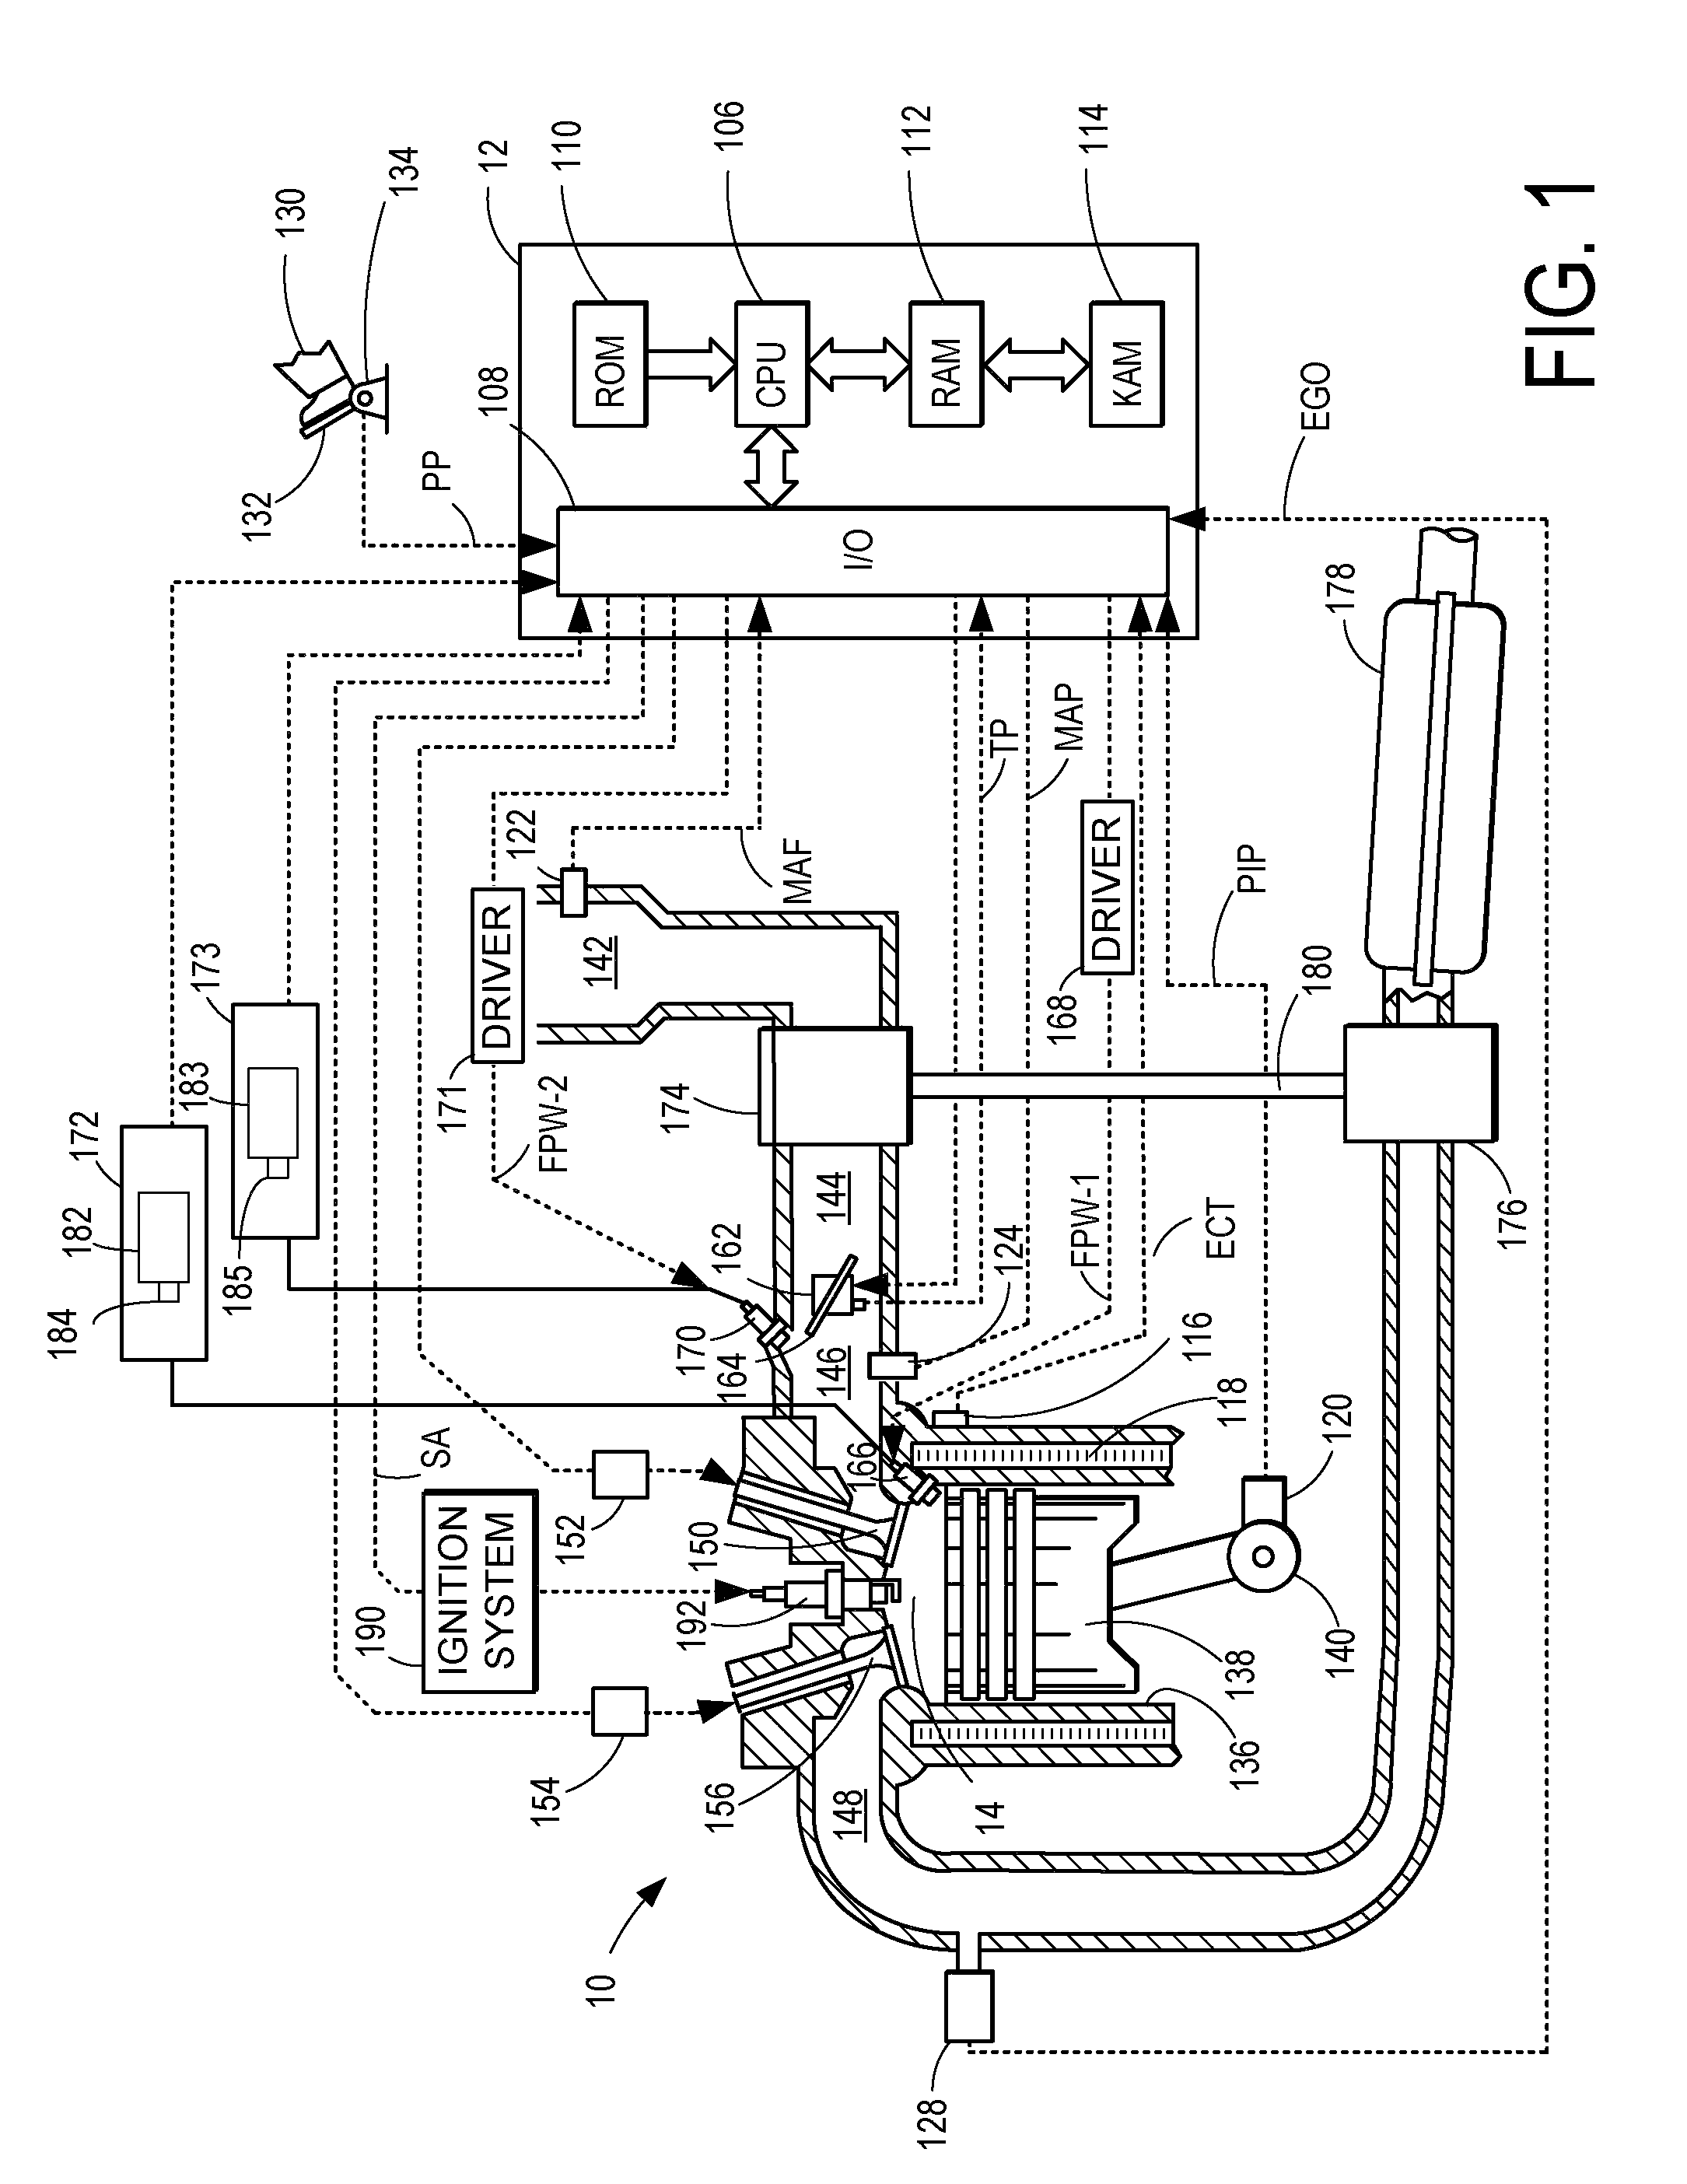 Selectably fueling with natural gas or direct injection ethanol